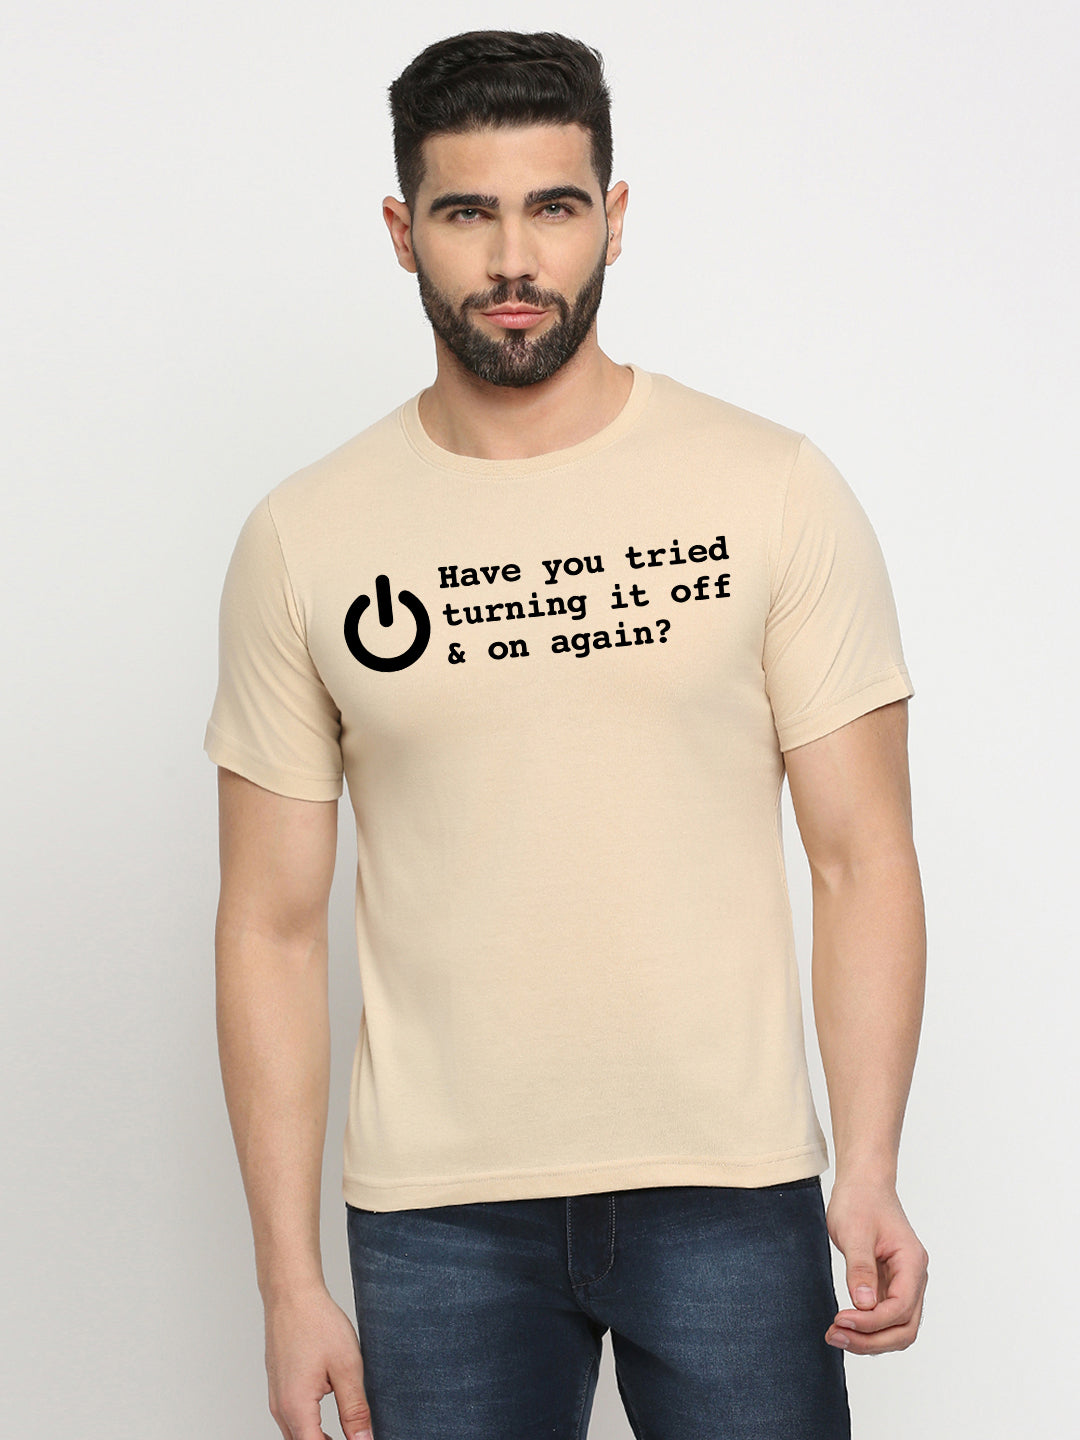 Have You Tried Turning it Off T-Shirt